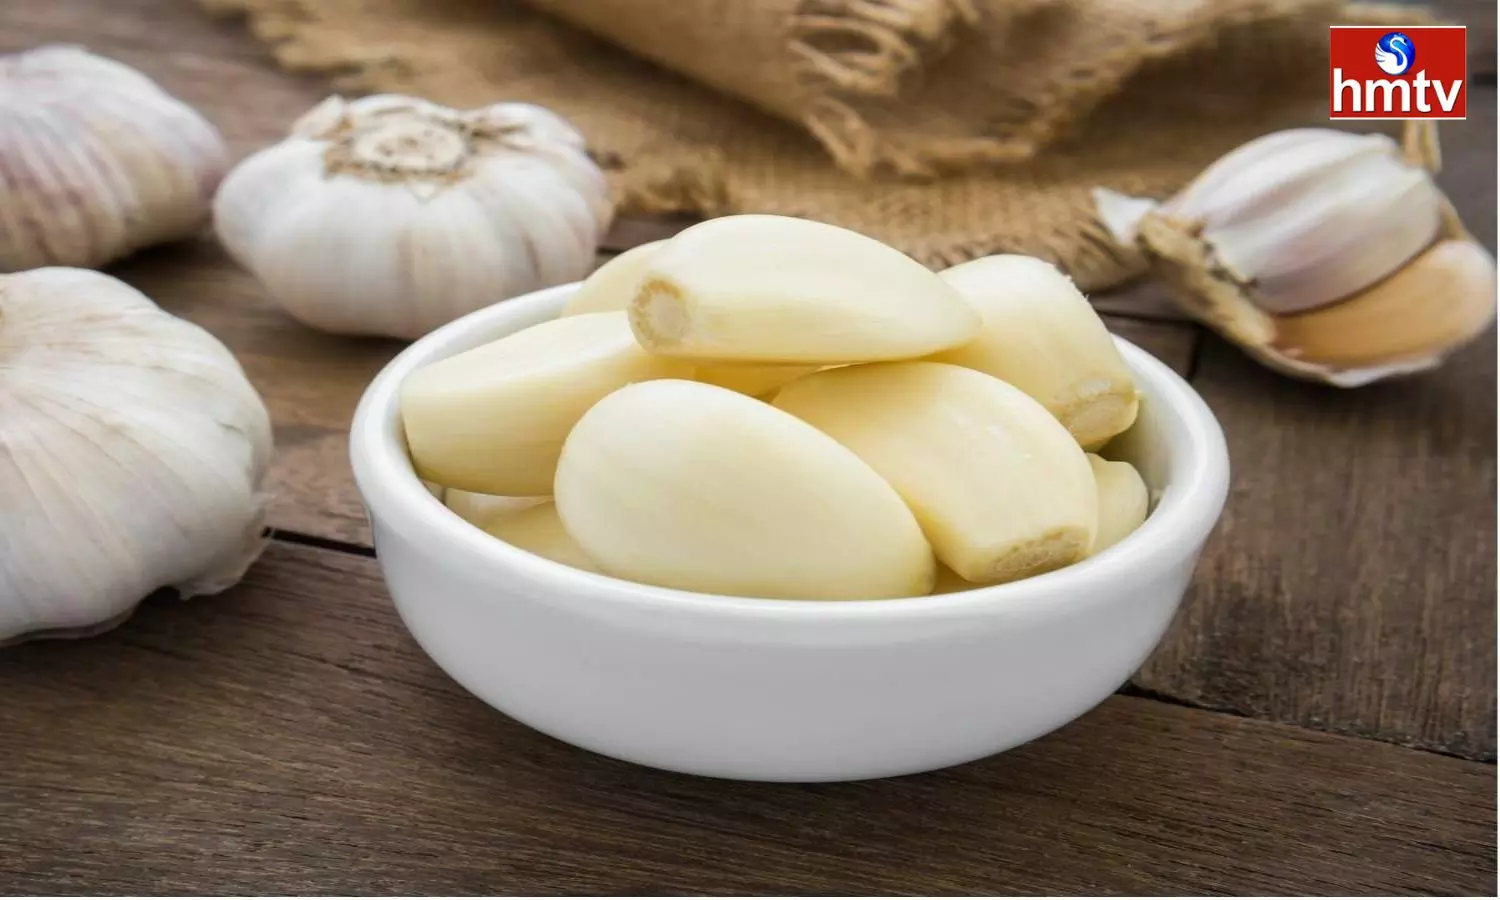 Eating Raw Garlic in the Stomach Has Amazing Health Benefits Know about them